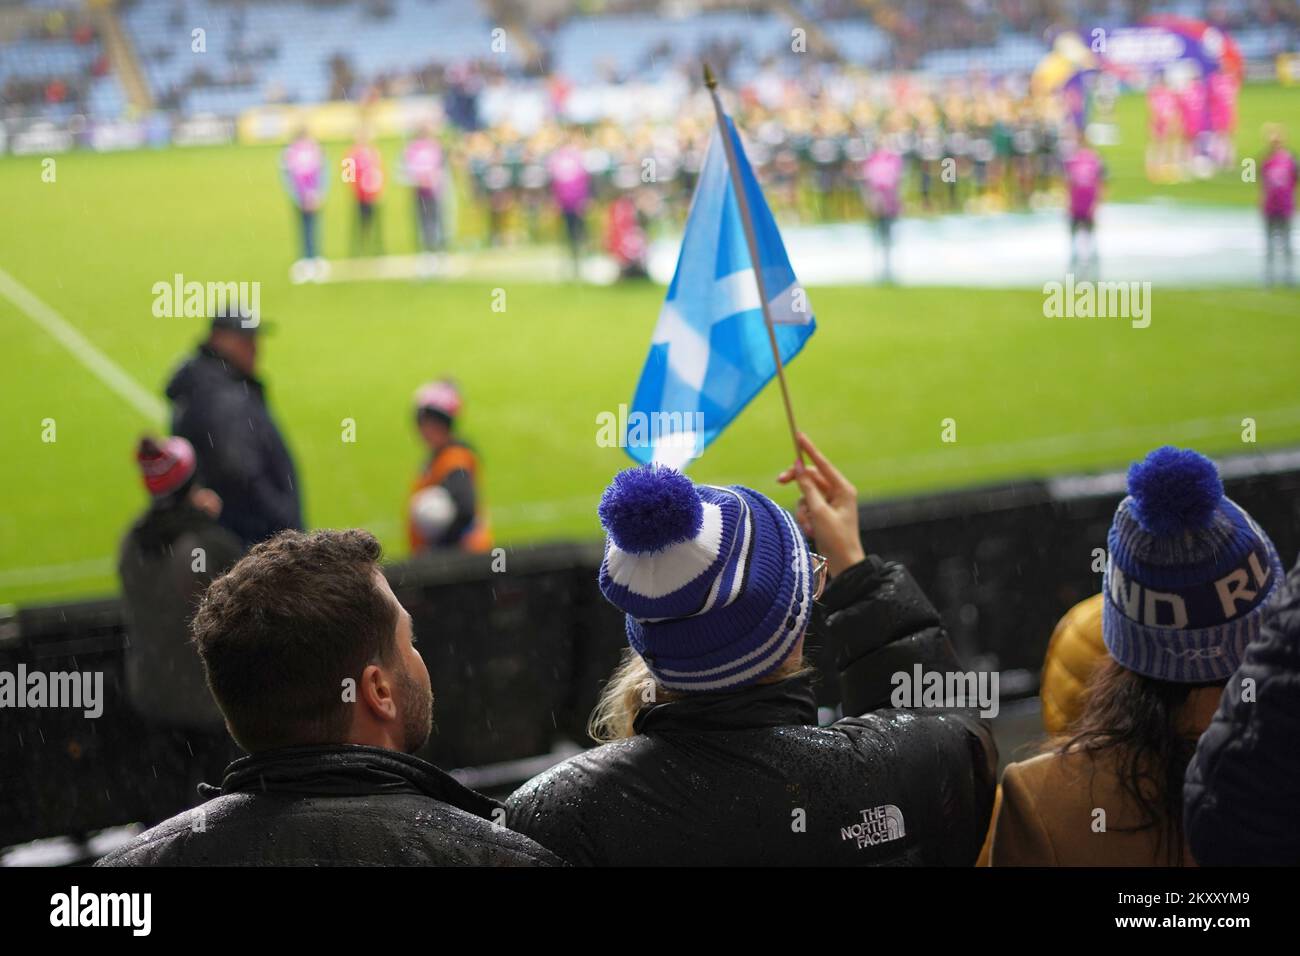 Scottish rugby league supporters at rugby league world cup 2021, Coventry Arena, October 2022 Stock Photo